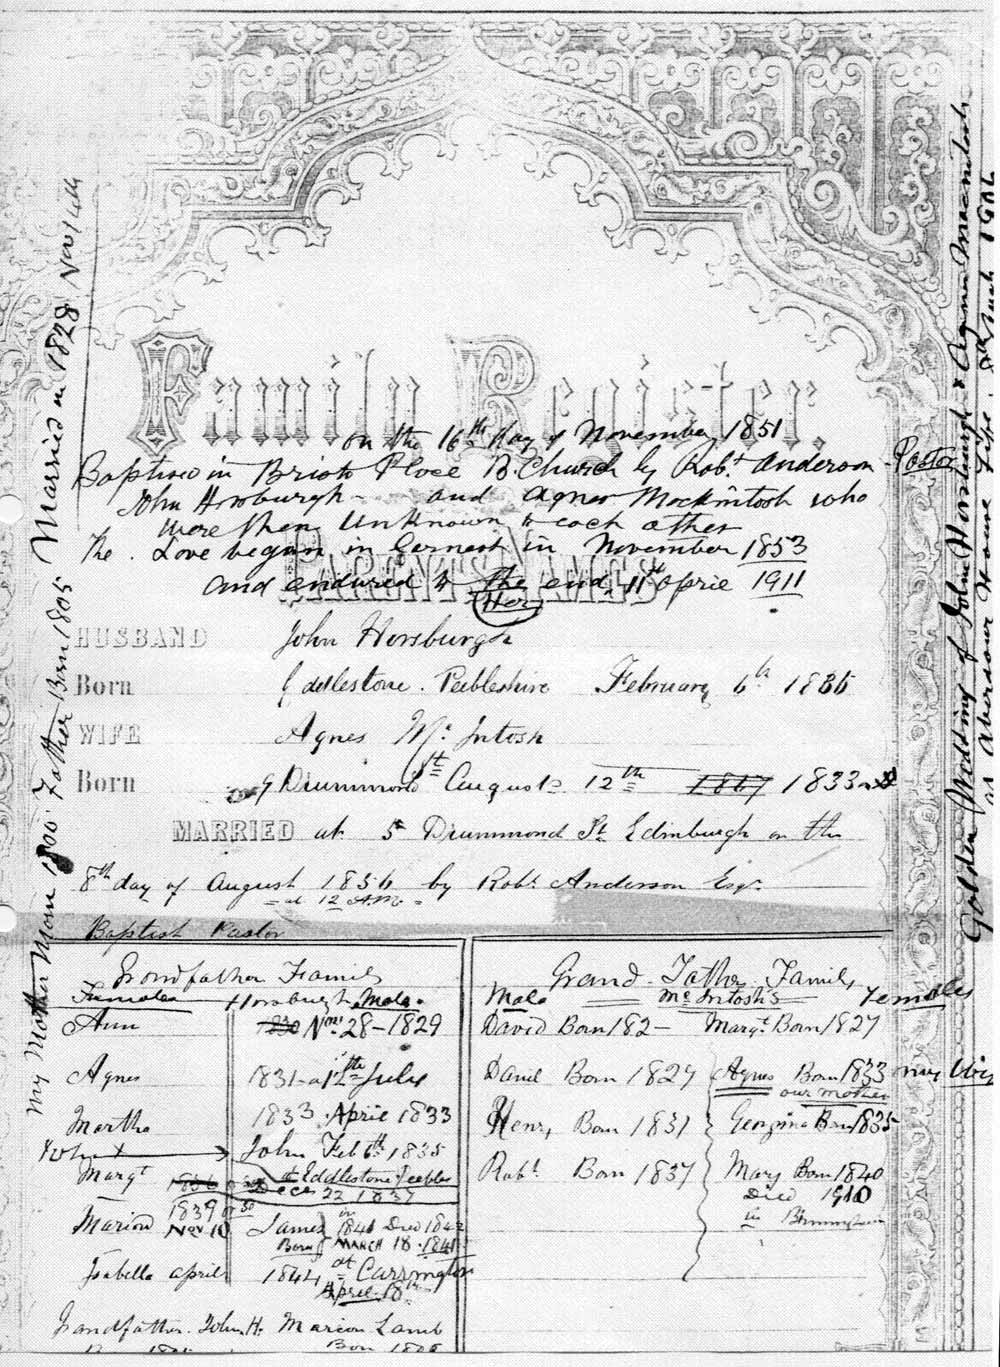 A page from the Family Register in John Horsburgh's family Bible  -  Details of the marriage between John Horsburgh and Agnes McIntosh